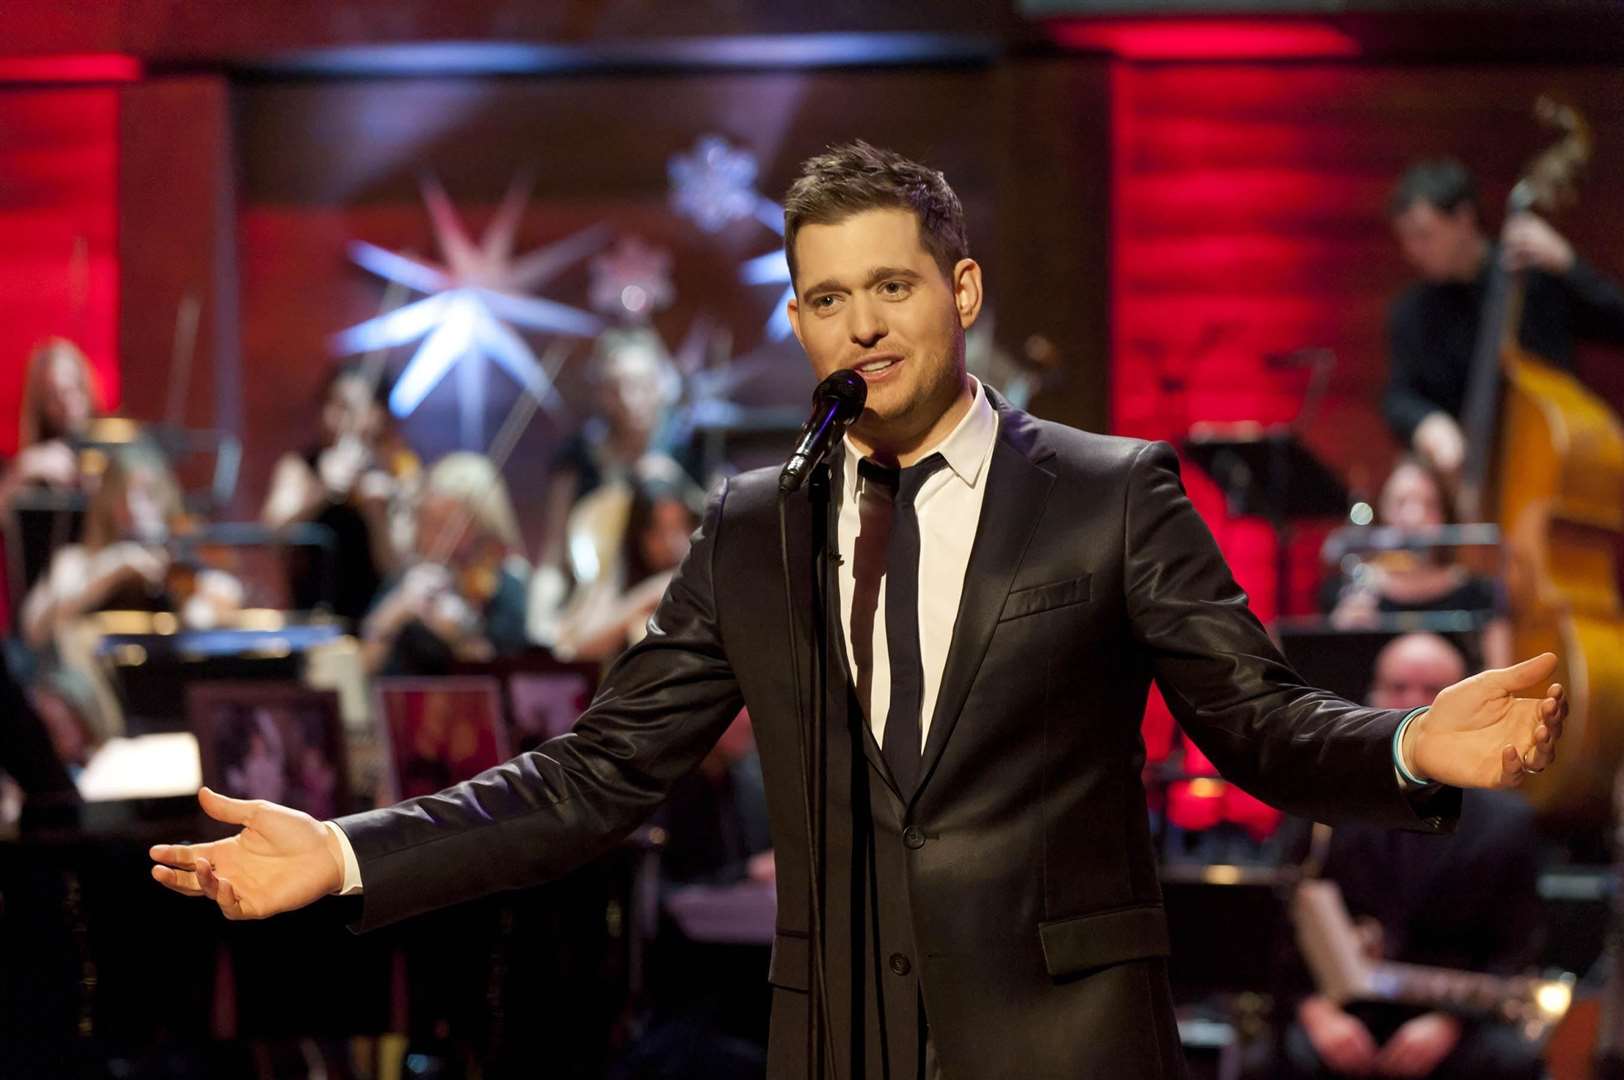 Michael Bublé will also perform at the ground in July